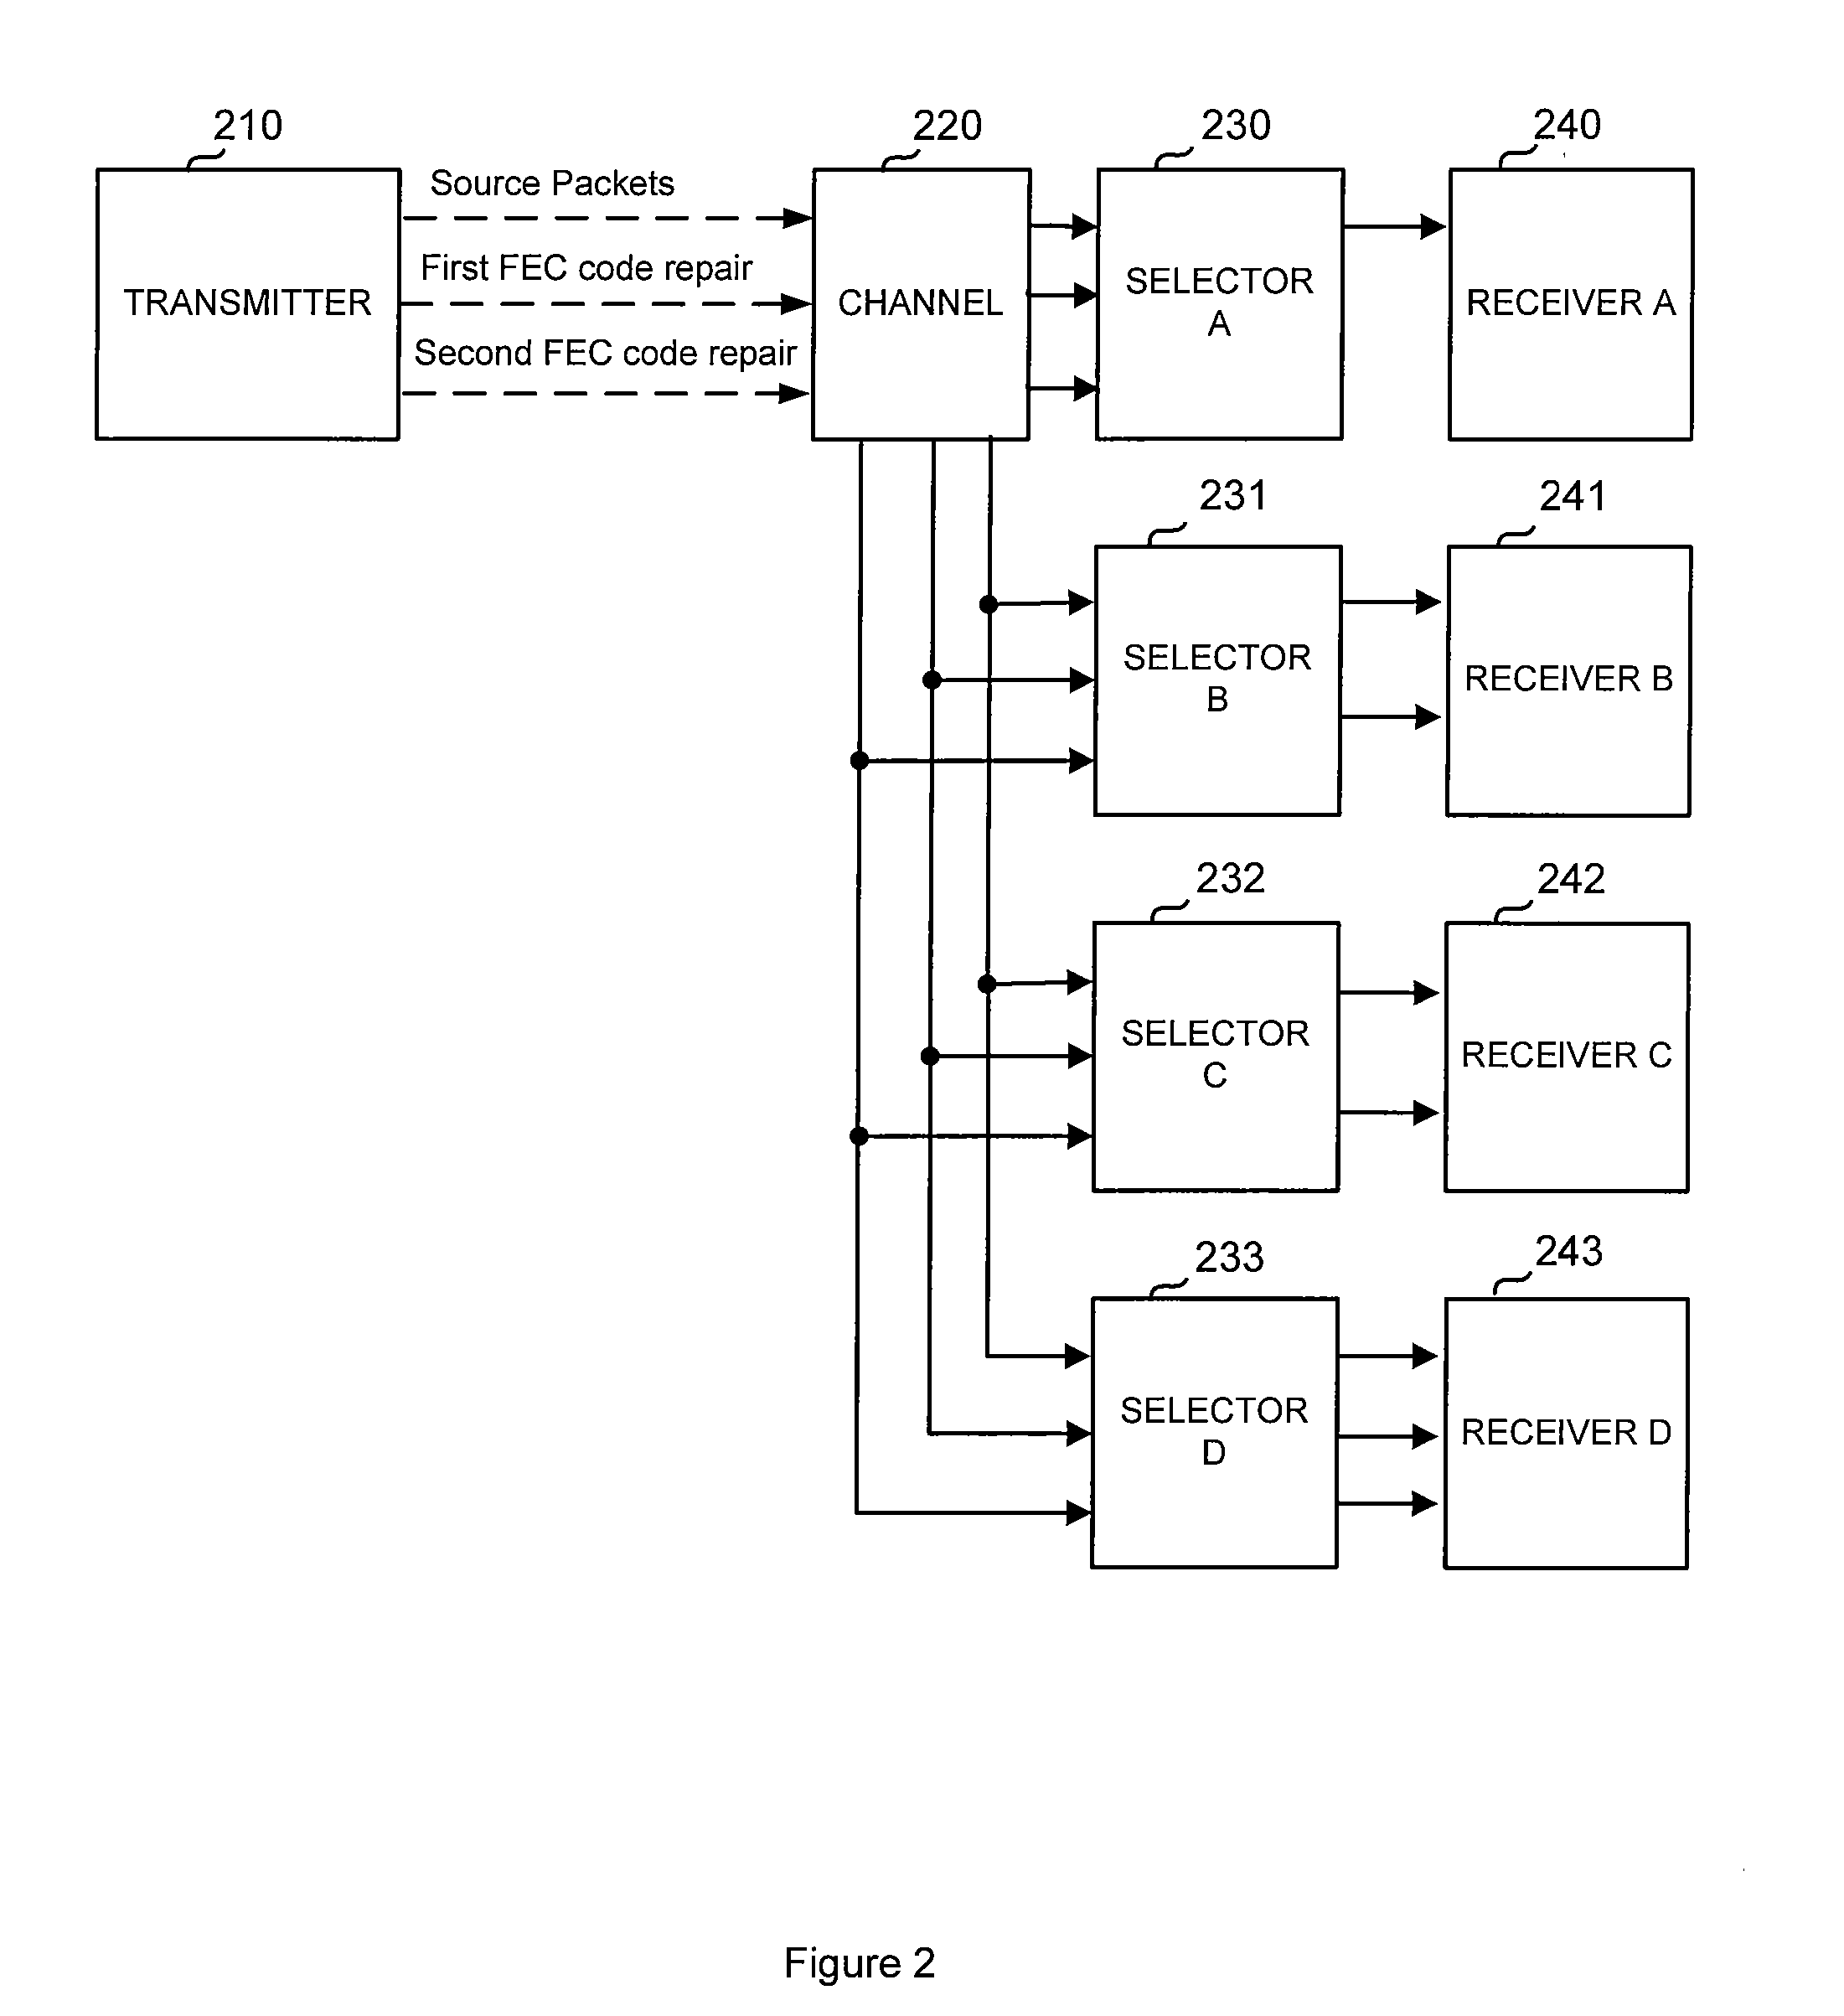 Code generator and decoder for communications systems operating using hybrid codes to allow for multiple efficient users of the communications systems